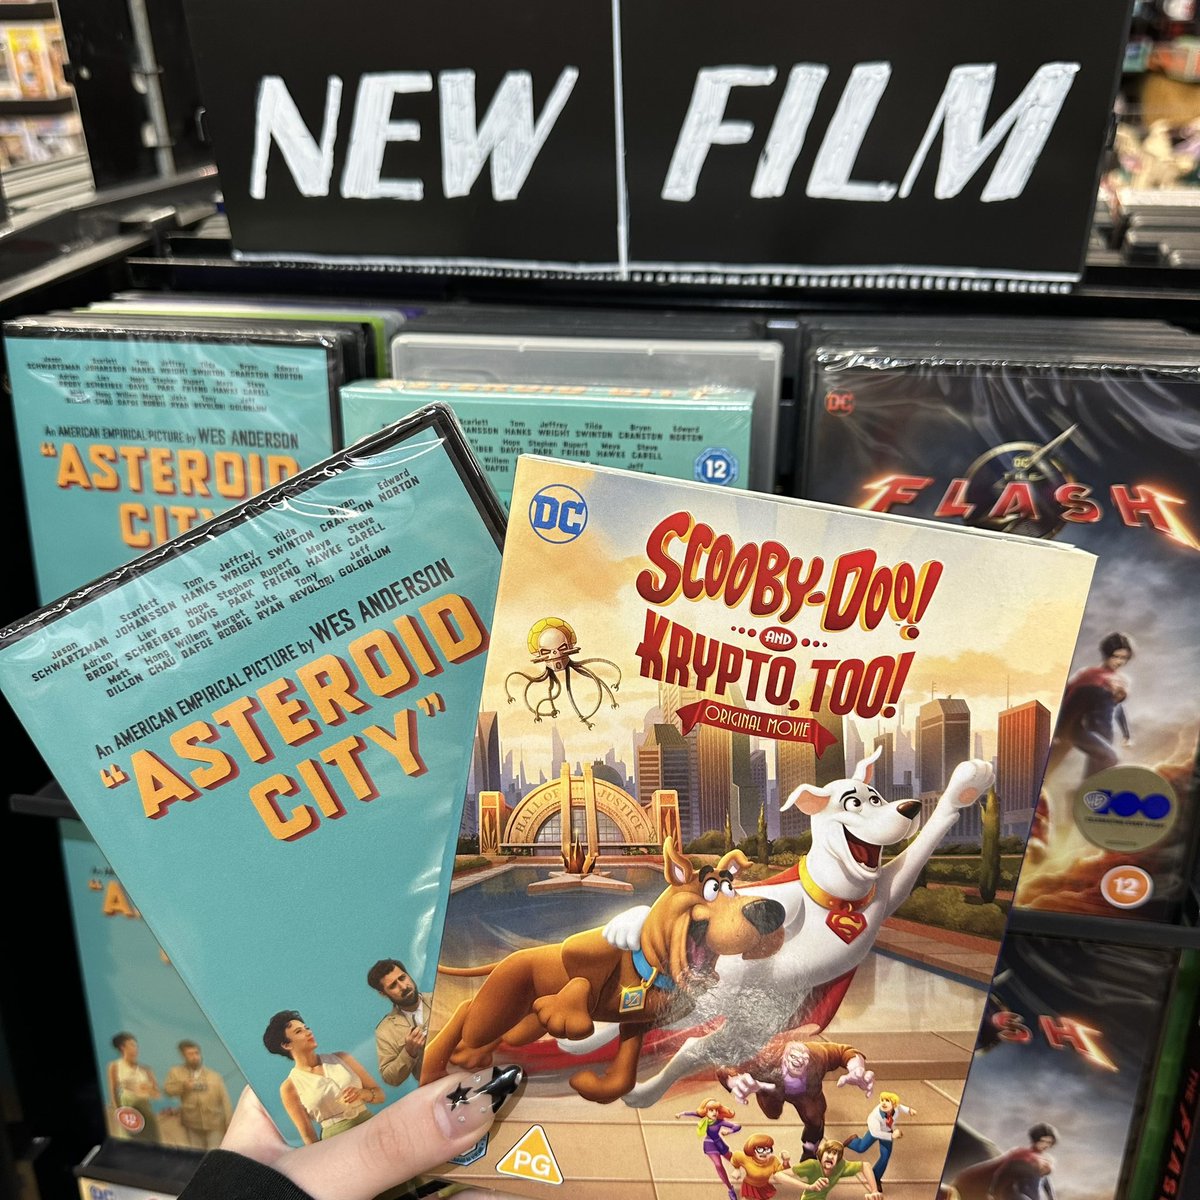 Zoinks! We have cool new release in including: 🐾Scooby Doo, ☄️Asteroid City and 🌟Star Trek Prodigy! #hmv #hmvluton #asteroidcity #scoobydoo #startrekprodigy #jackryan